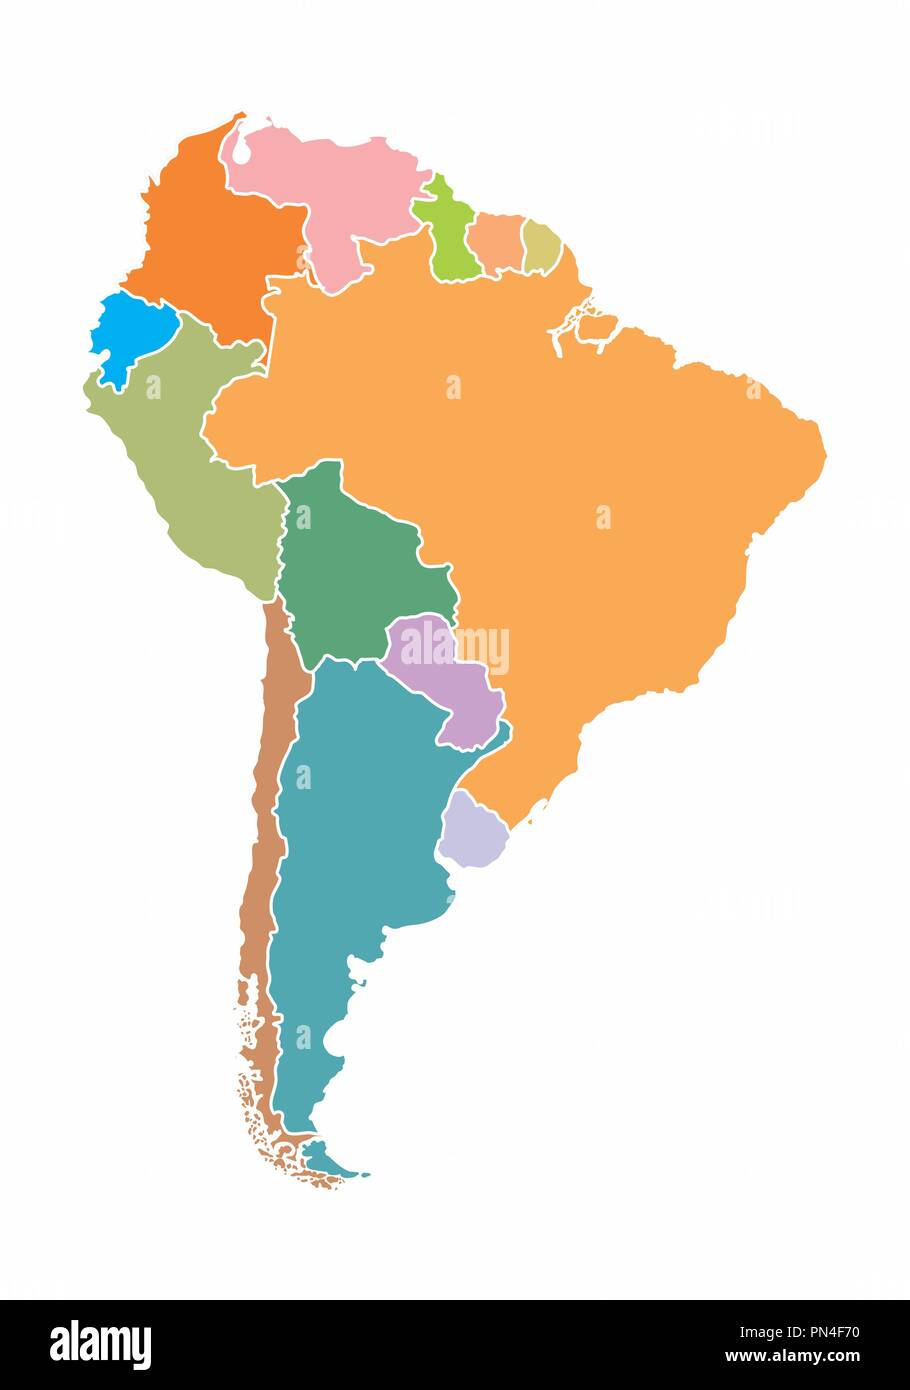 A colorful map of South America on white background Stock Vector